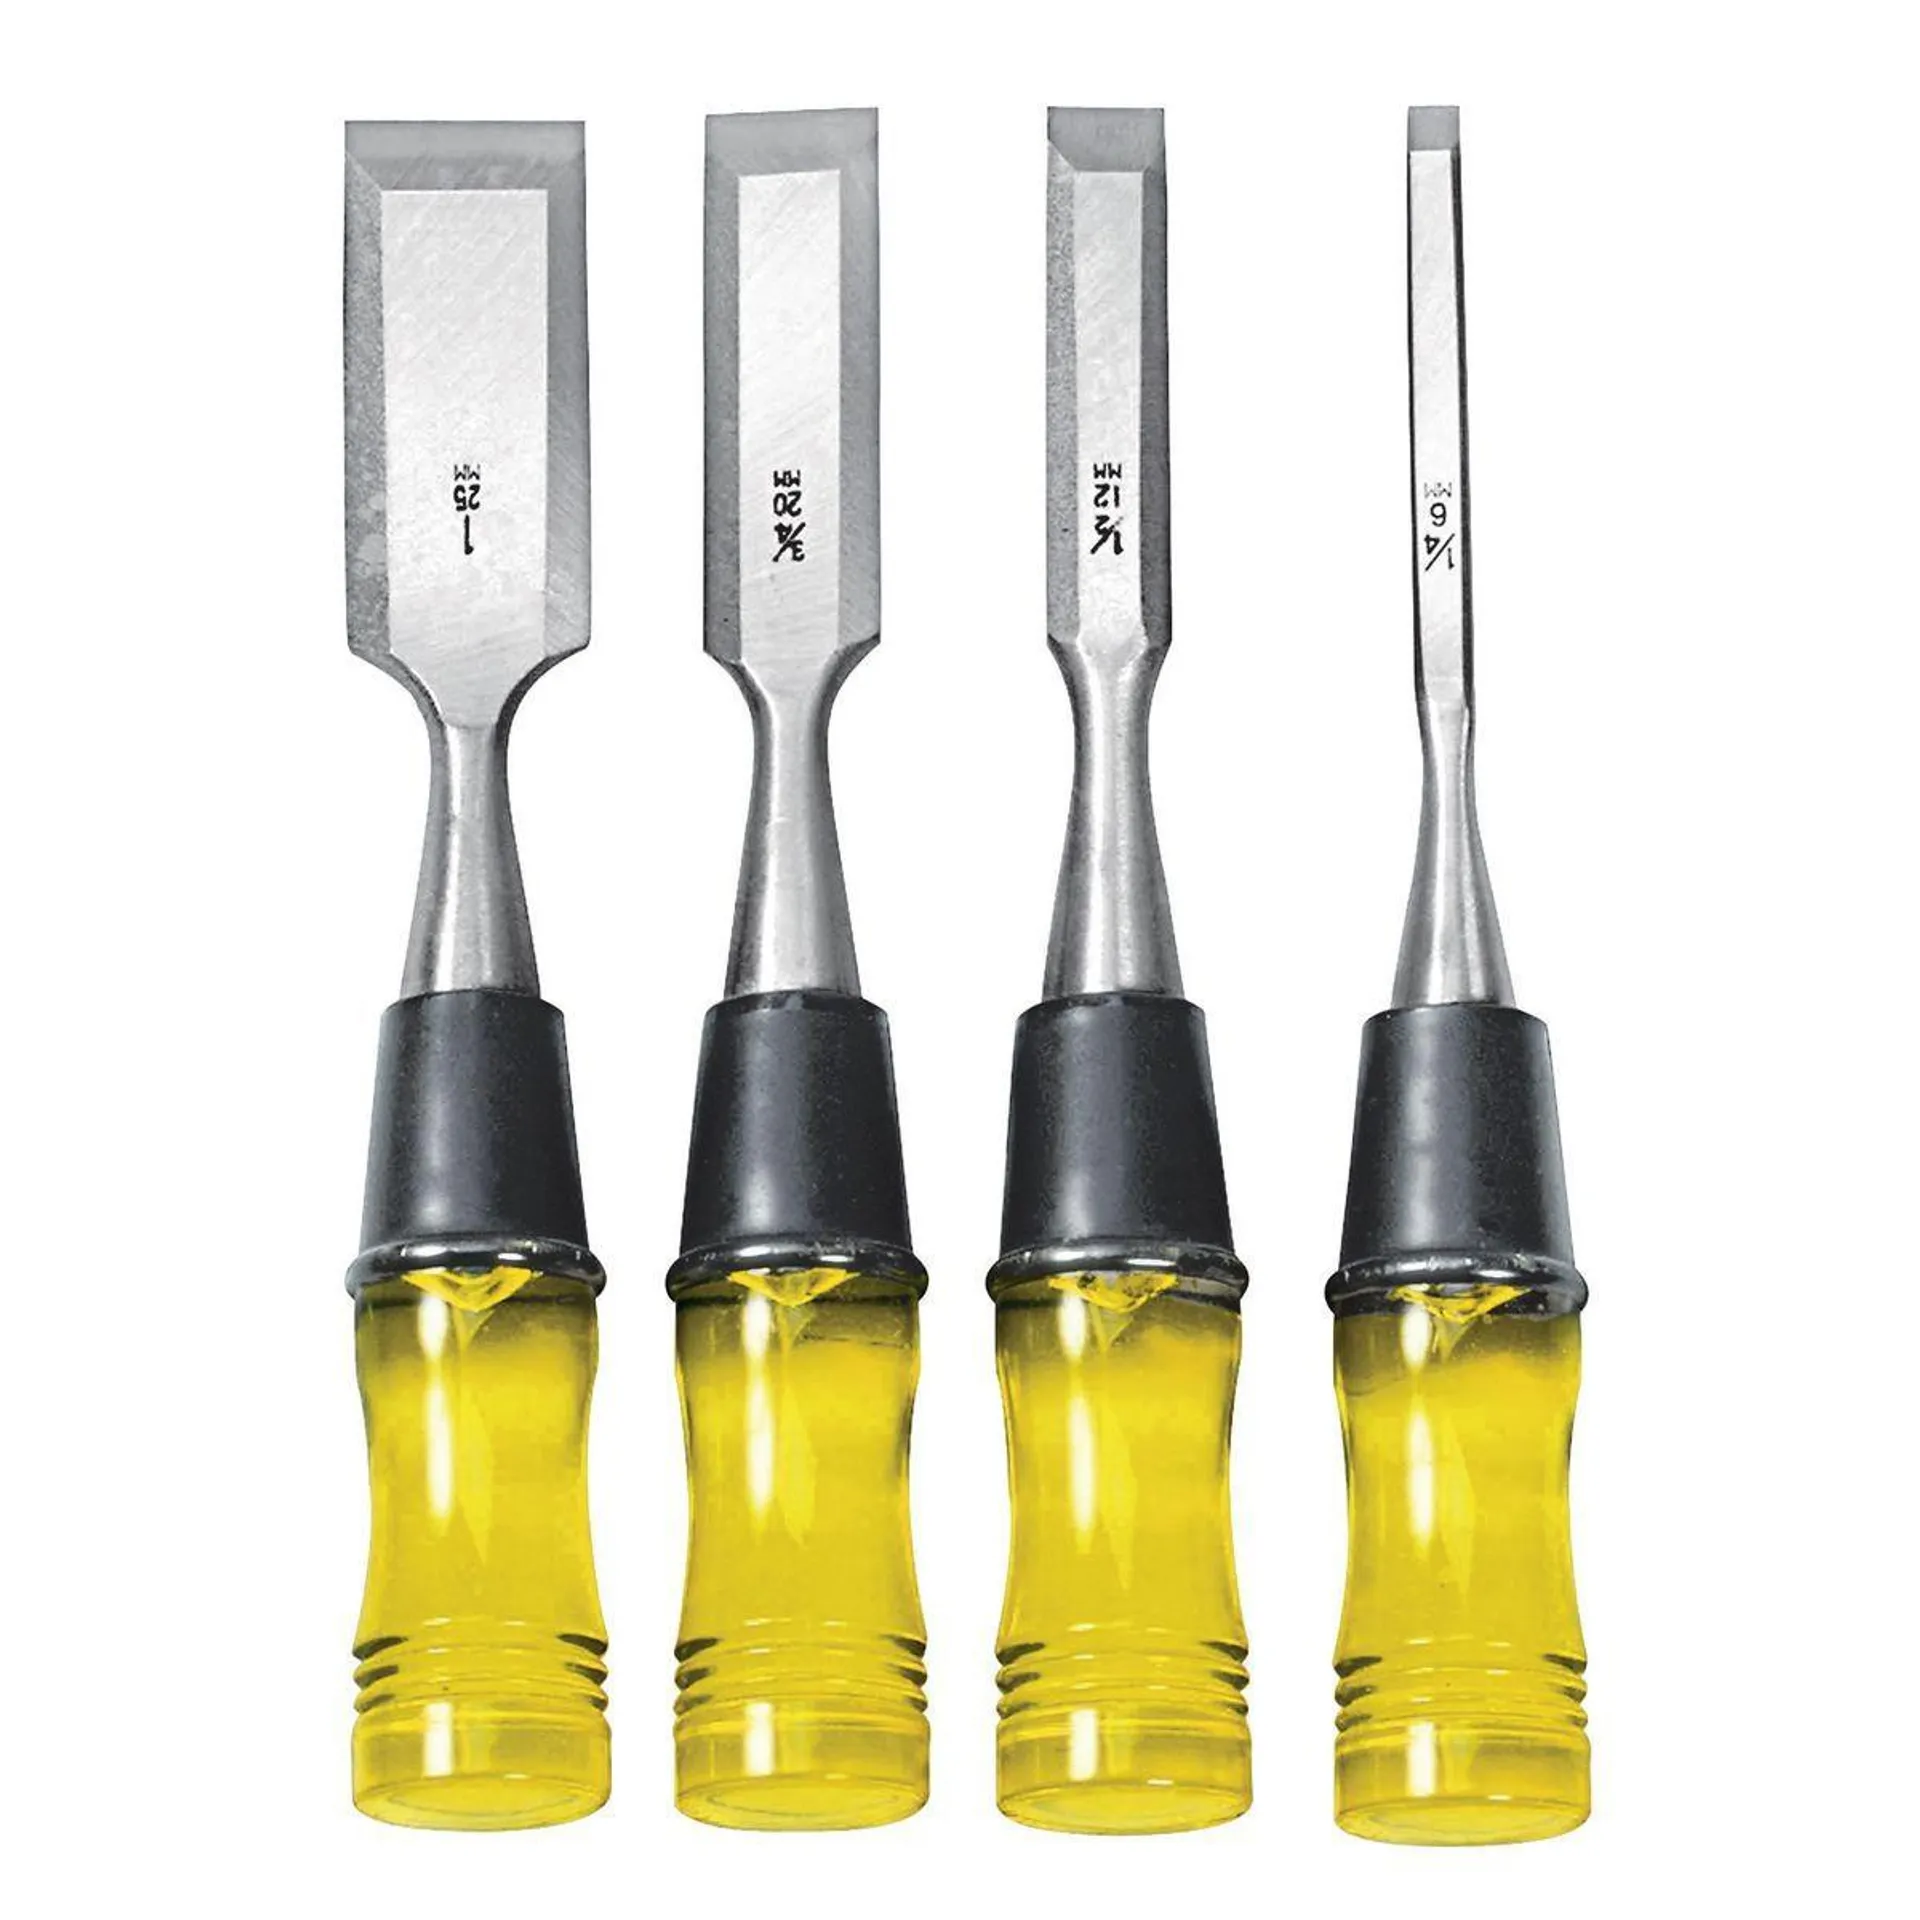 Wood Chisel Set with Clear PVC Handle, 4 Piece